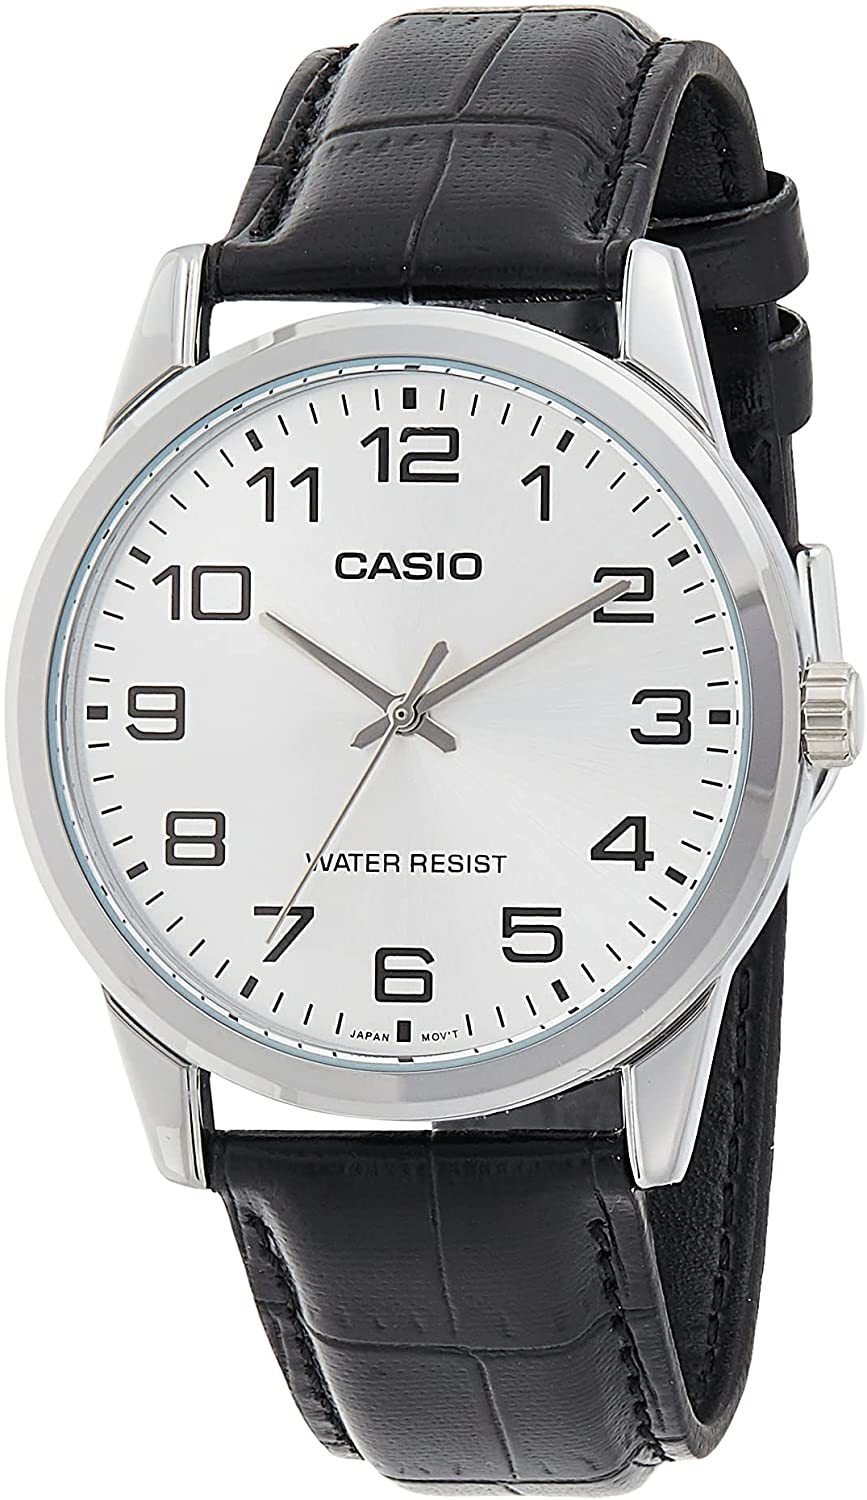 Casio General Mens Watch - MTP-V001L-7BUDF | Leather Band | Water-Resistant | Quartz Movement | Classic Style | Fashionable | Durable | Affordable | Halabh.com